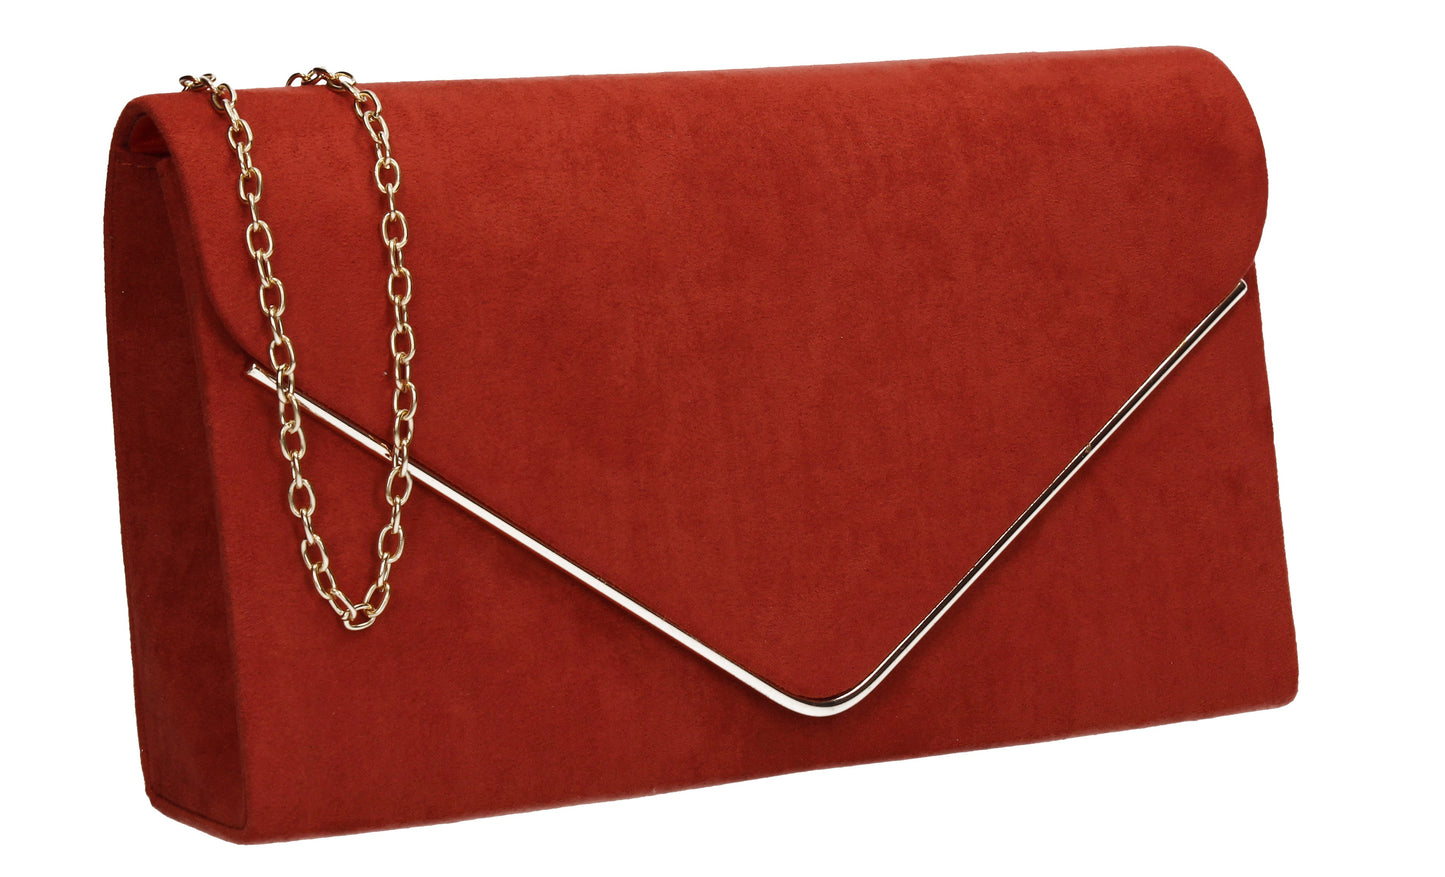 Poppy Faux Suede Envelope Clutch Bag Rust Red